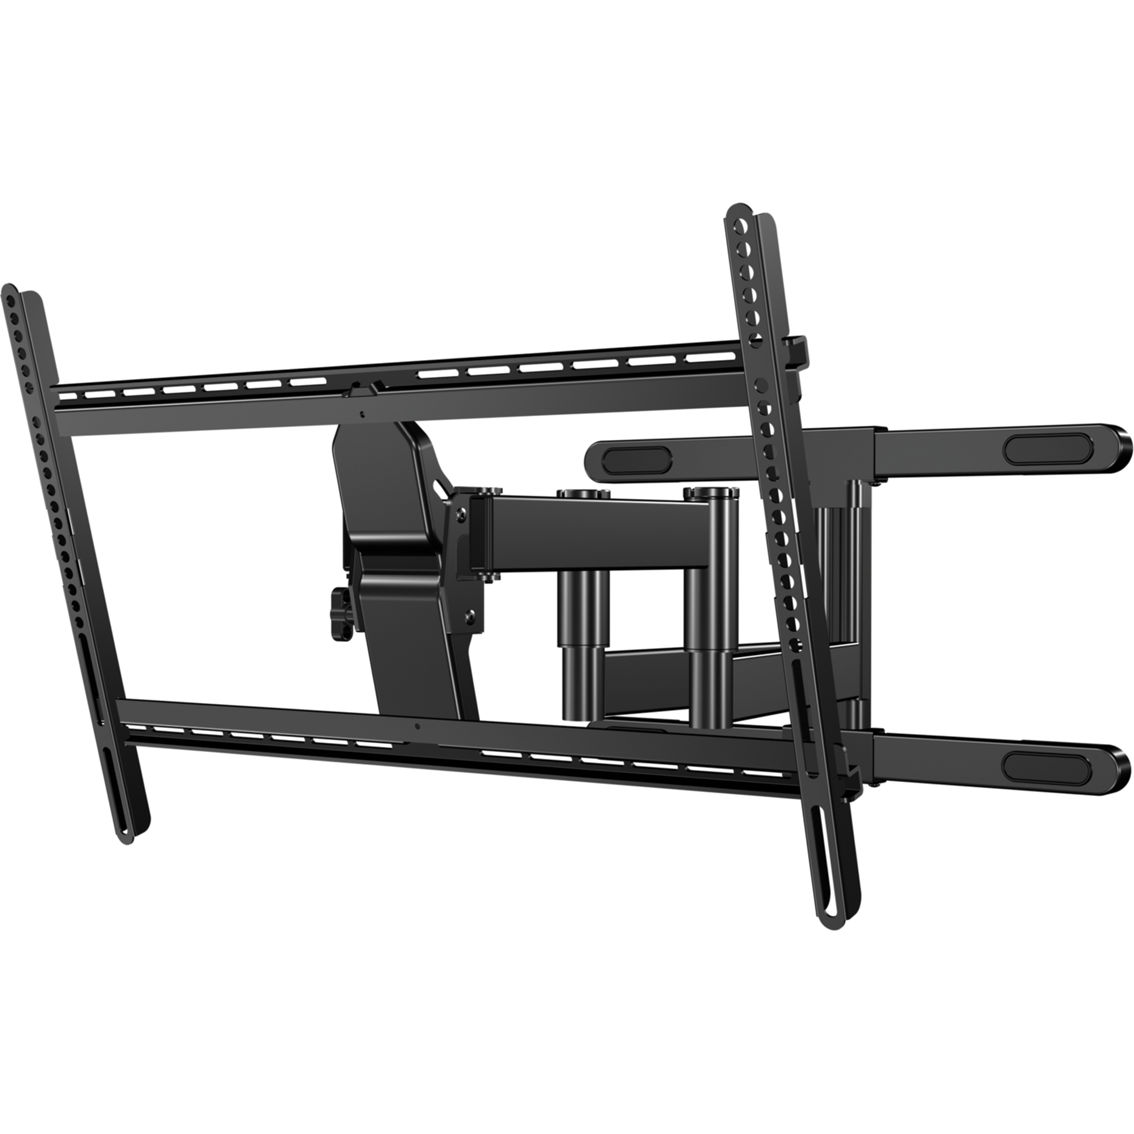 SANUS Vuepoint Full Motion TV Mount for 42 to 85 in. TVs with 9.8 ft. 4K HDMI Cable - Image 2 of 4